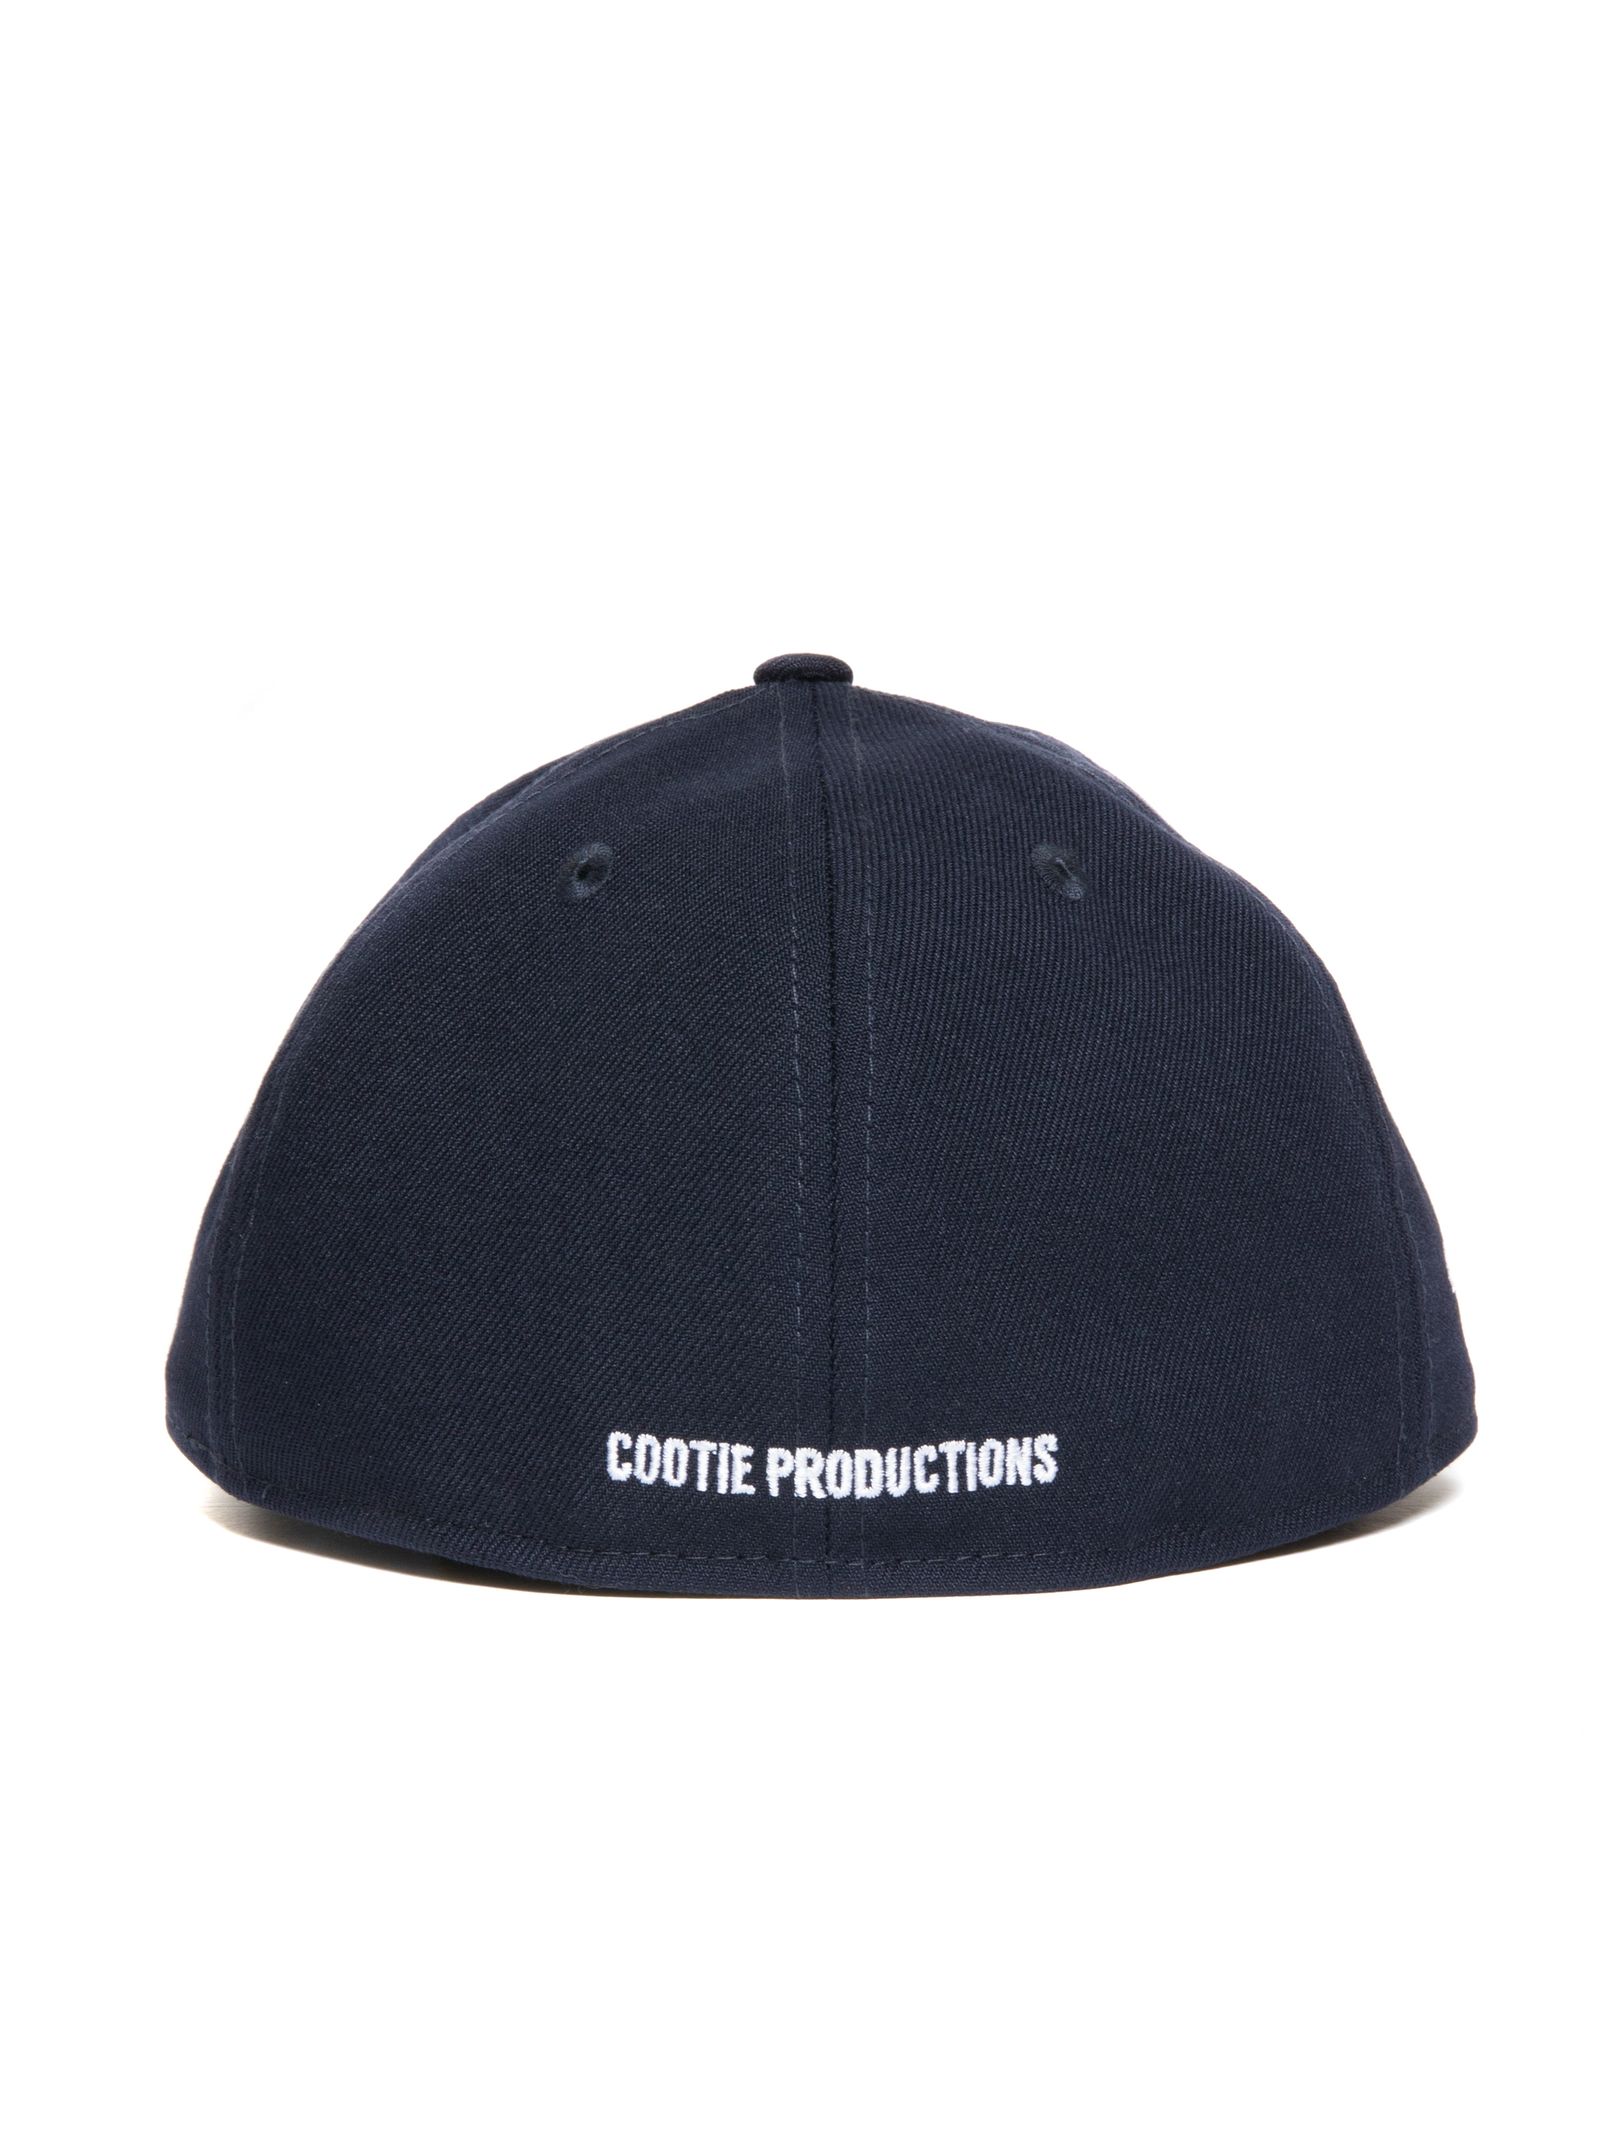 COOTIE PRODUCTIONS - Low Profile 59FIFTY / Navy / ニューエラ 